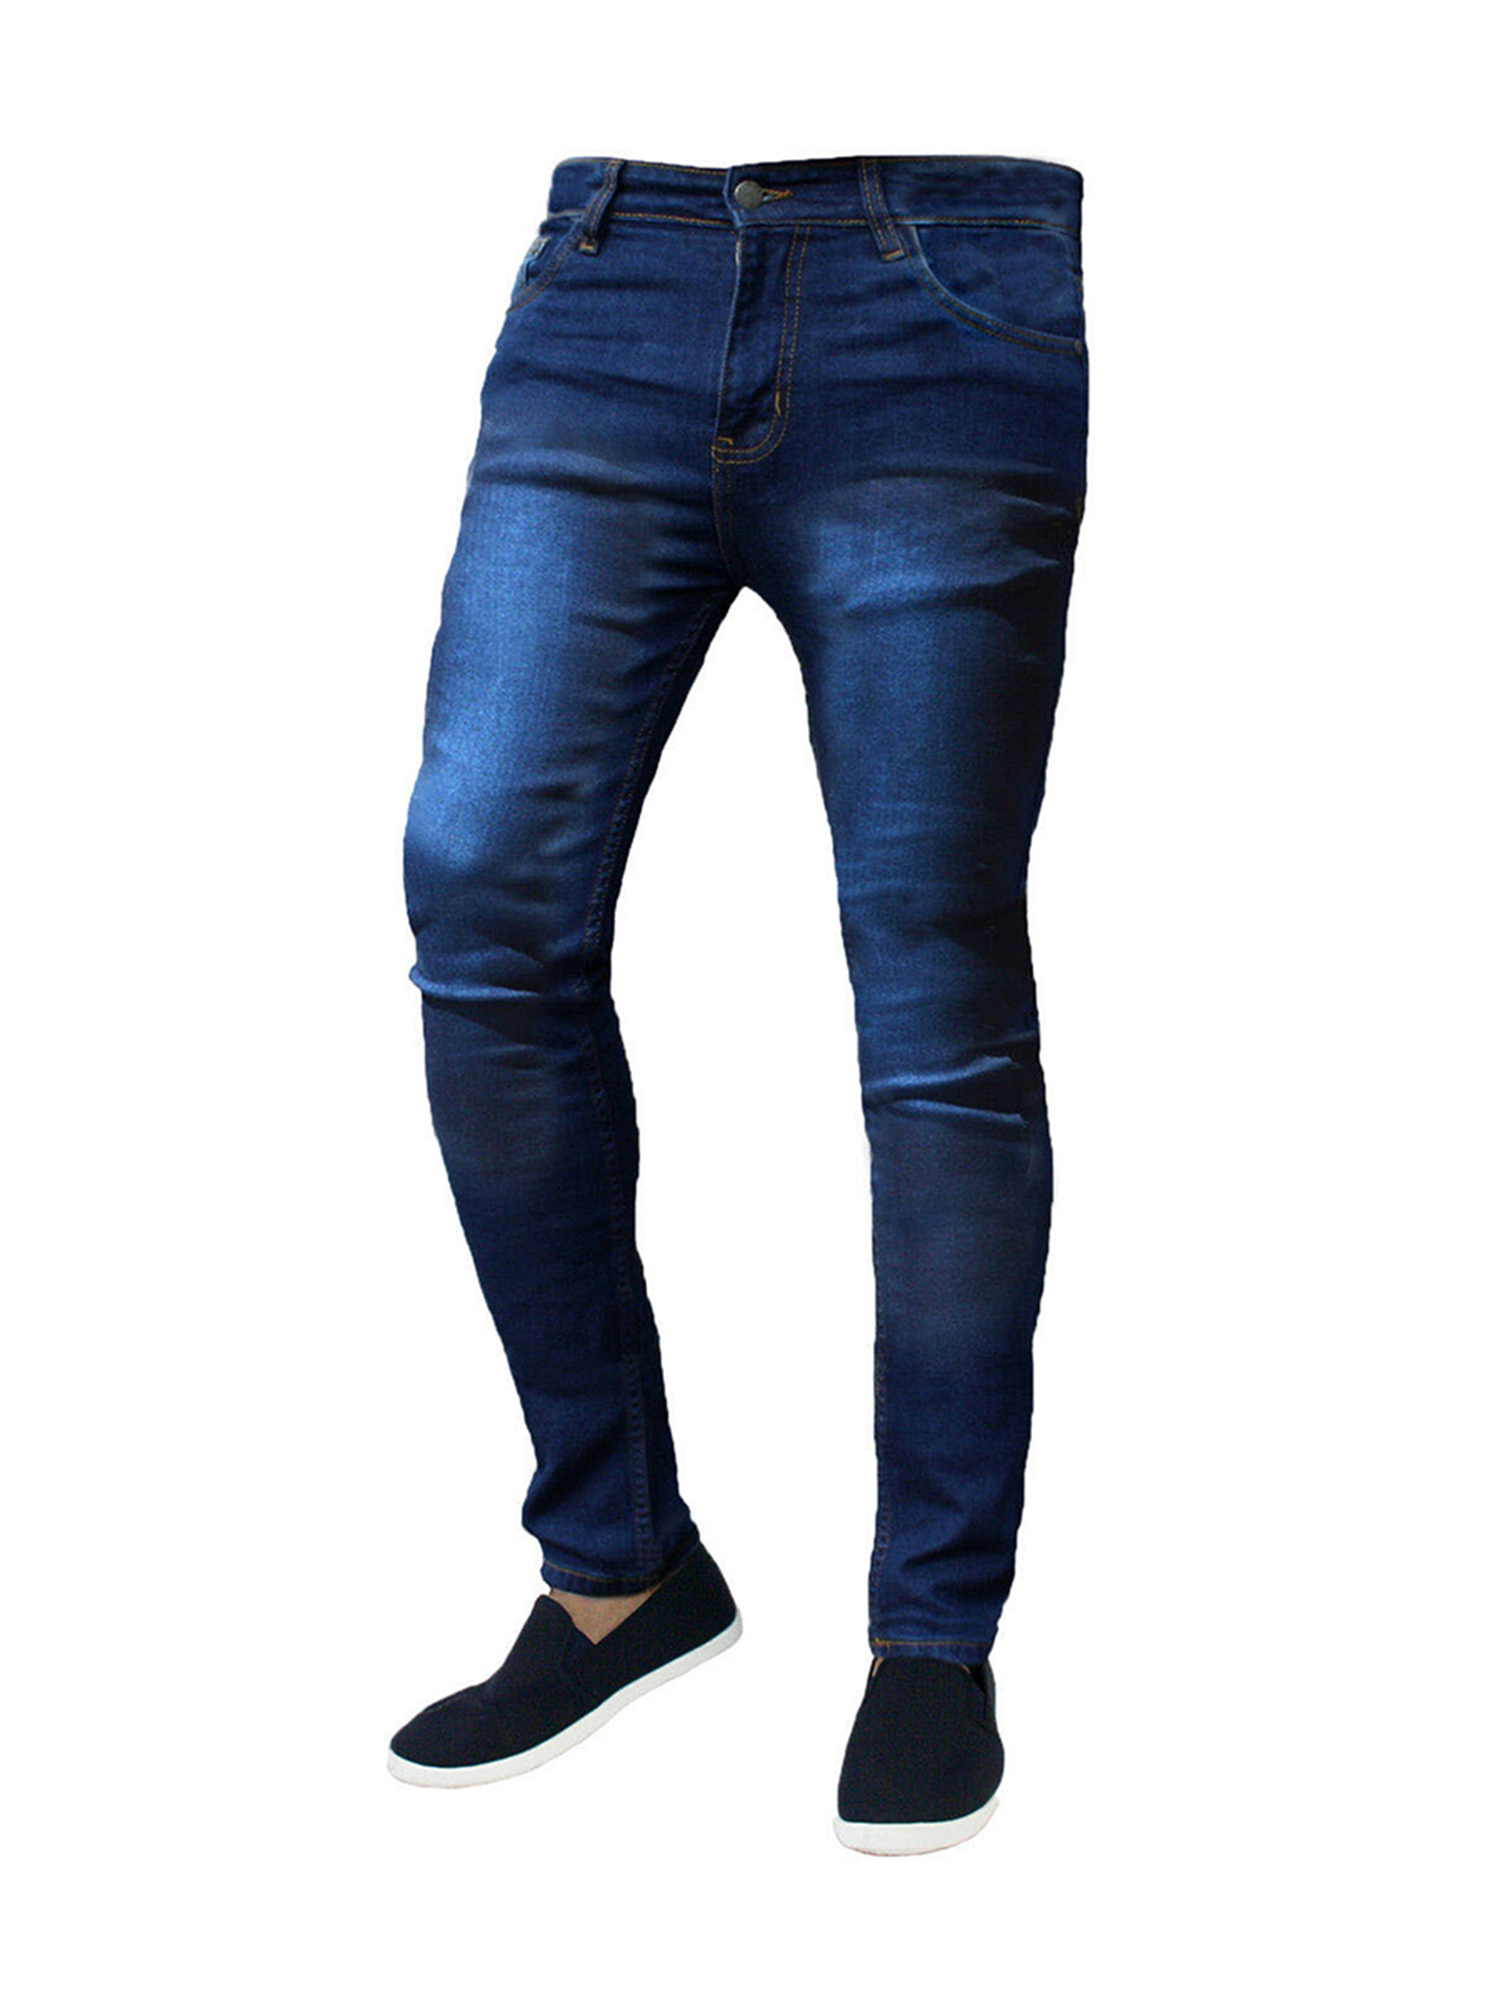 Fashion Youth Casual business white stretch jeans male men's trousers pencil  pants teenagers pantalon hombre